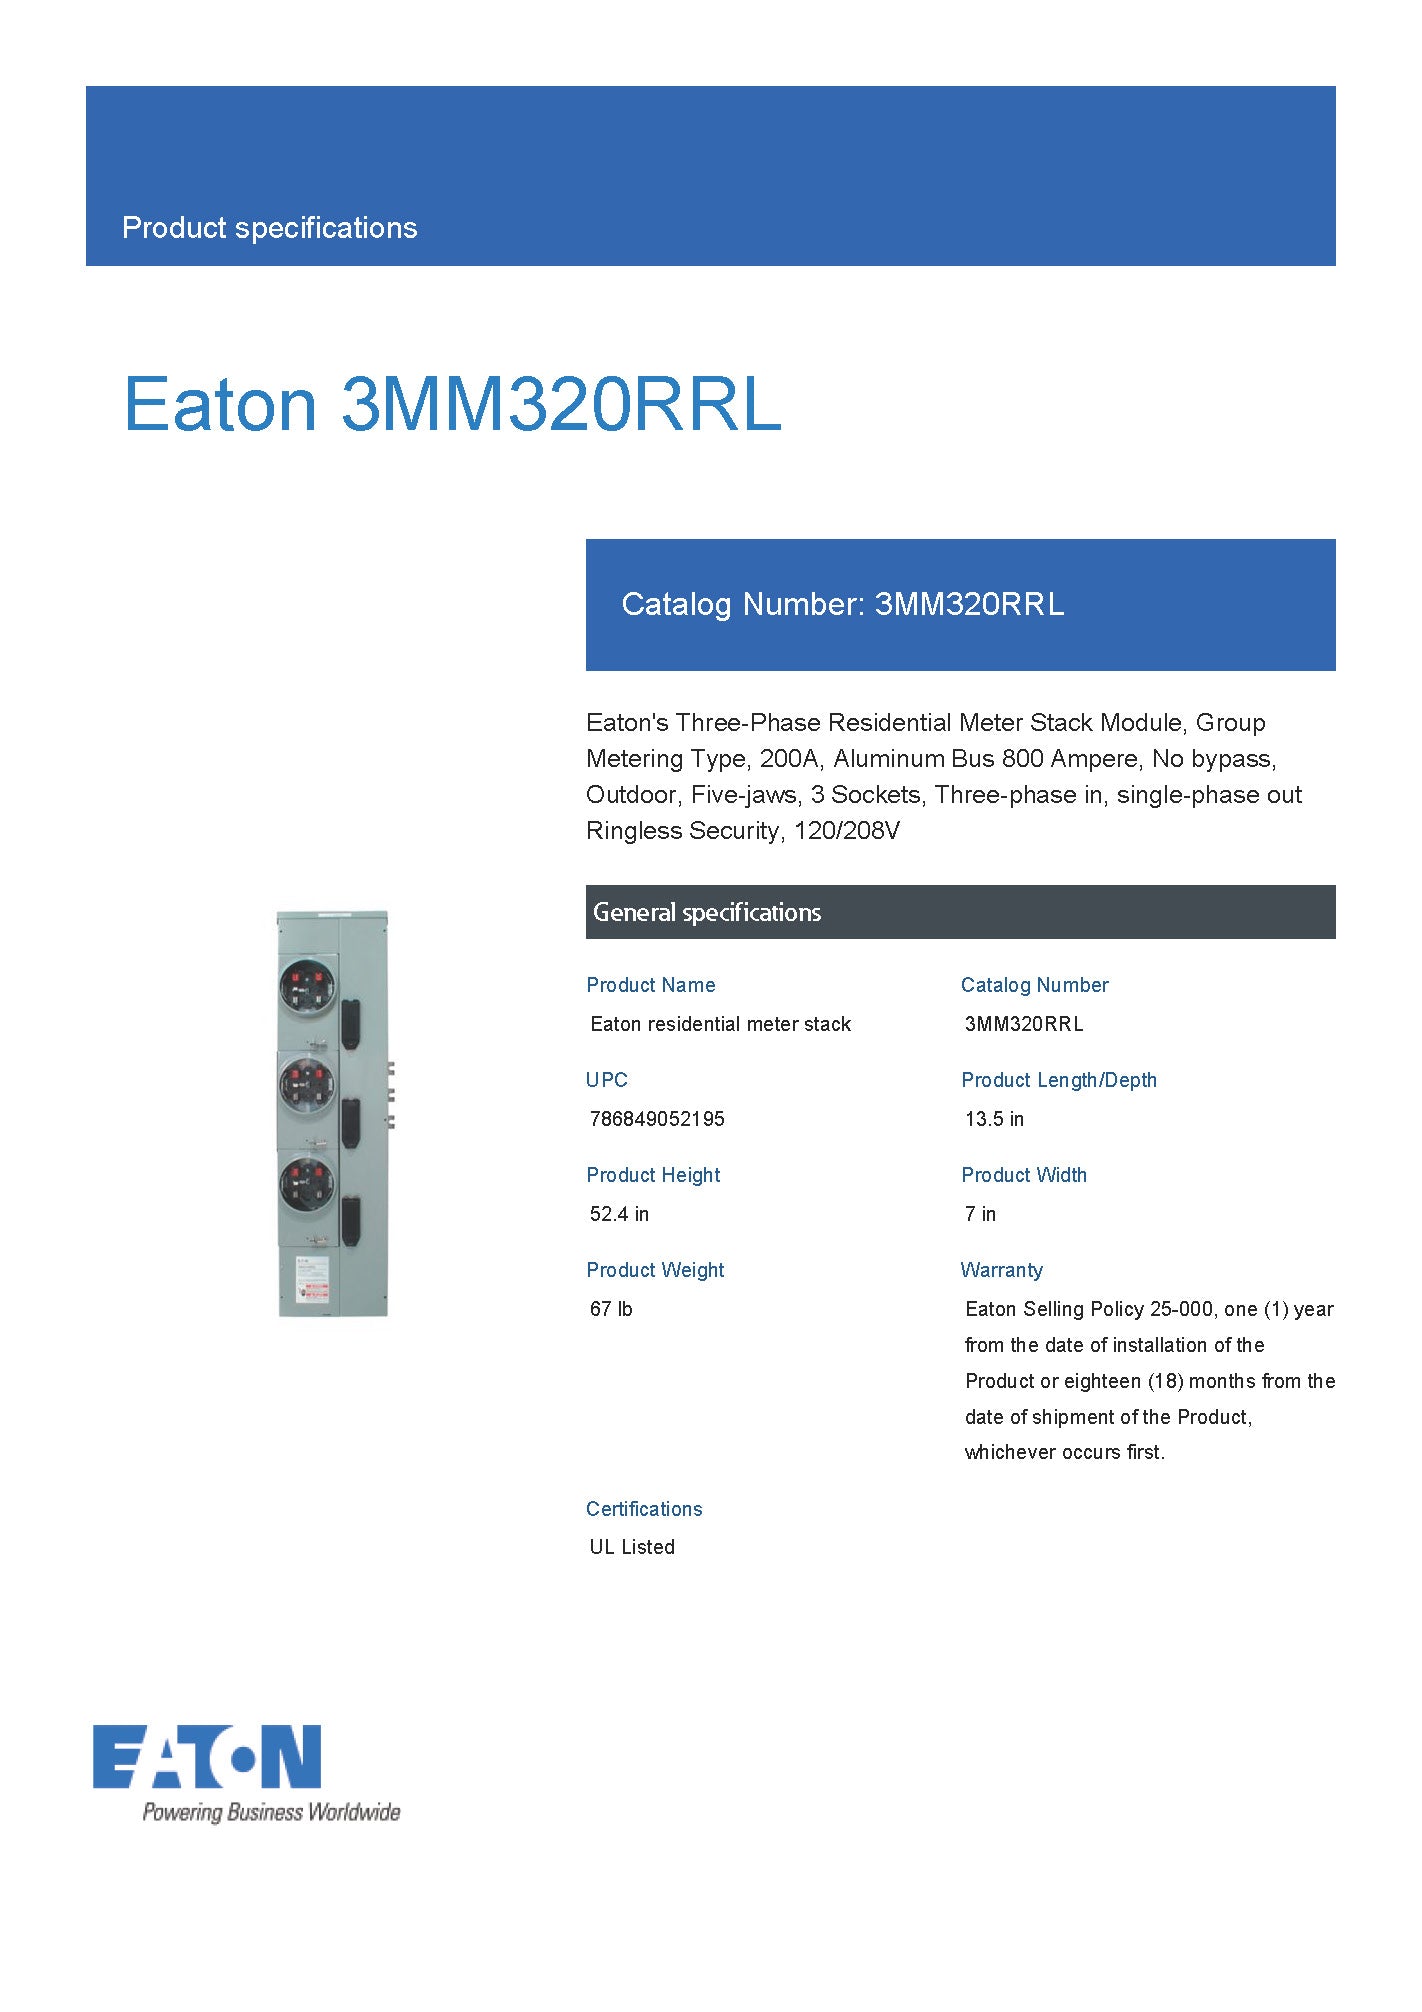 Eaton 3MM320RRL 3 Phase 3 Gang 200A Ringless Meter Stack